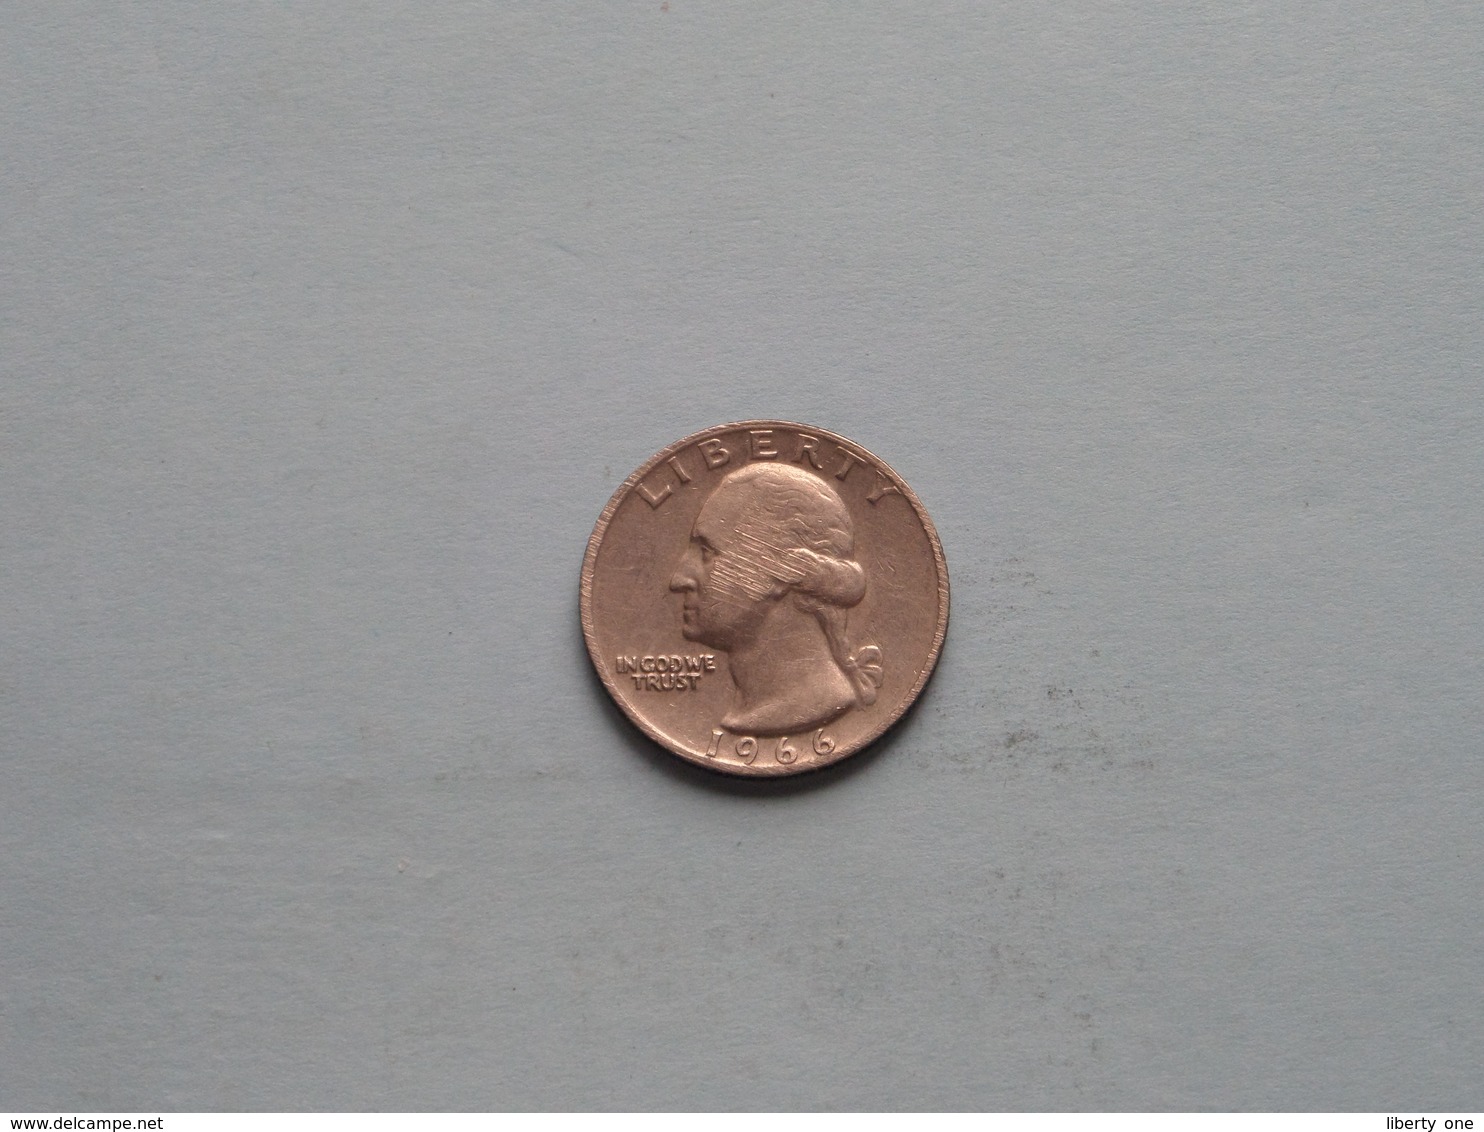 1966 - One Quarter / KM 164a ( Uncleaned Coin - For Grade, Please See Photo ) ! - 1932-1998: Washington